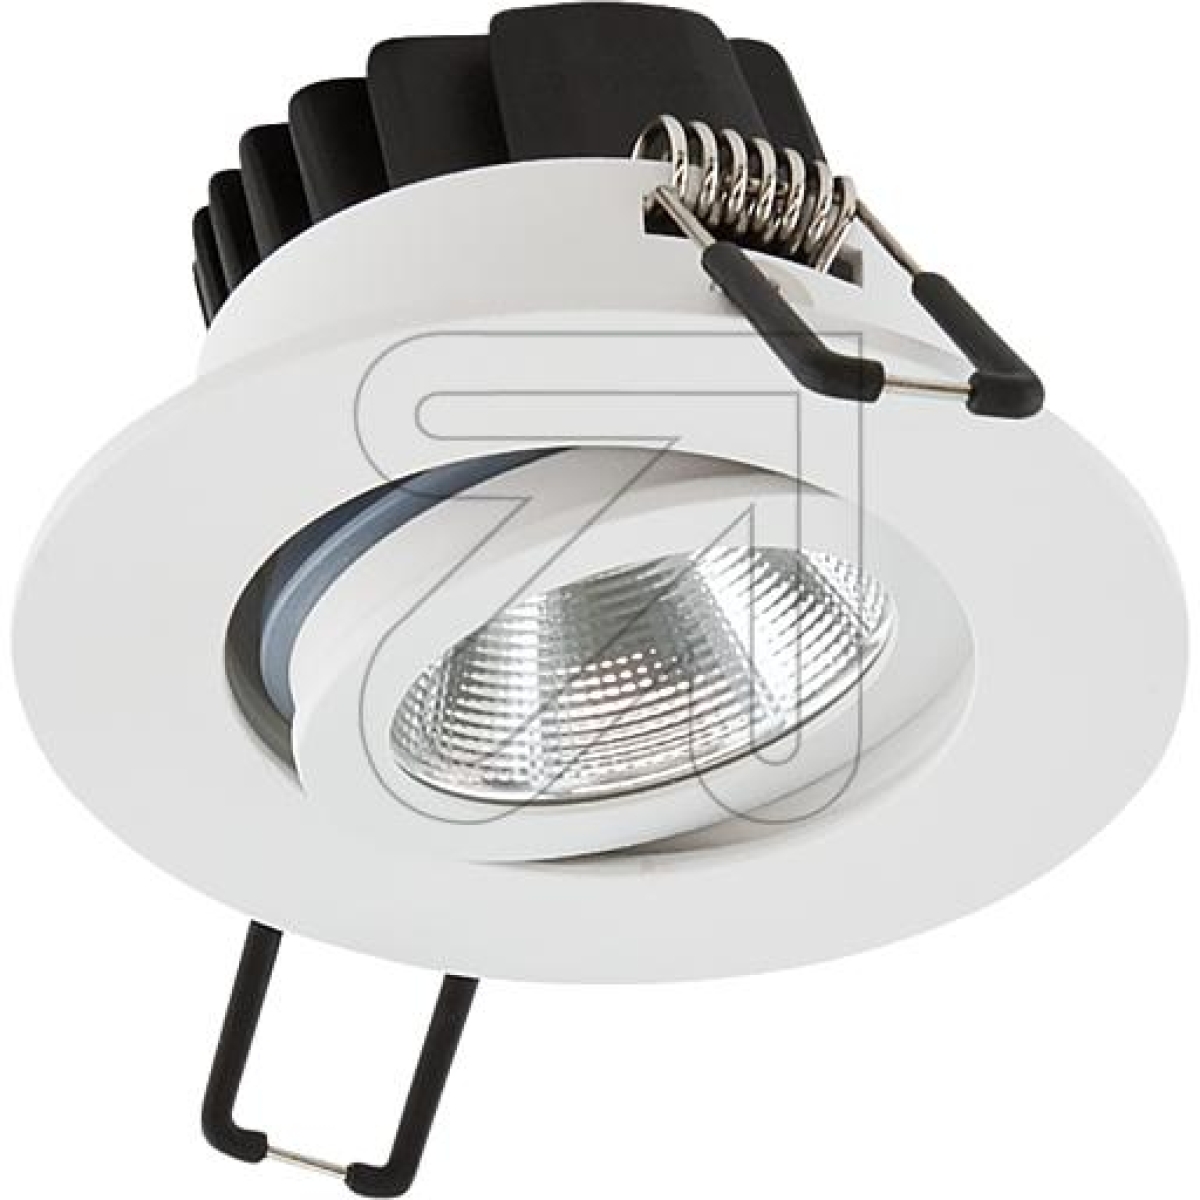 EVNLED recessed spotlight PC Ra> 90 IP65 Ø 83 T45 AØ 68mm swiveling 20° 6W 683lm 4000K white powder-coated. PC650N60140Article-No: 650190